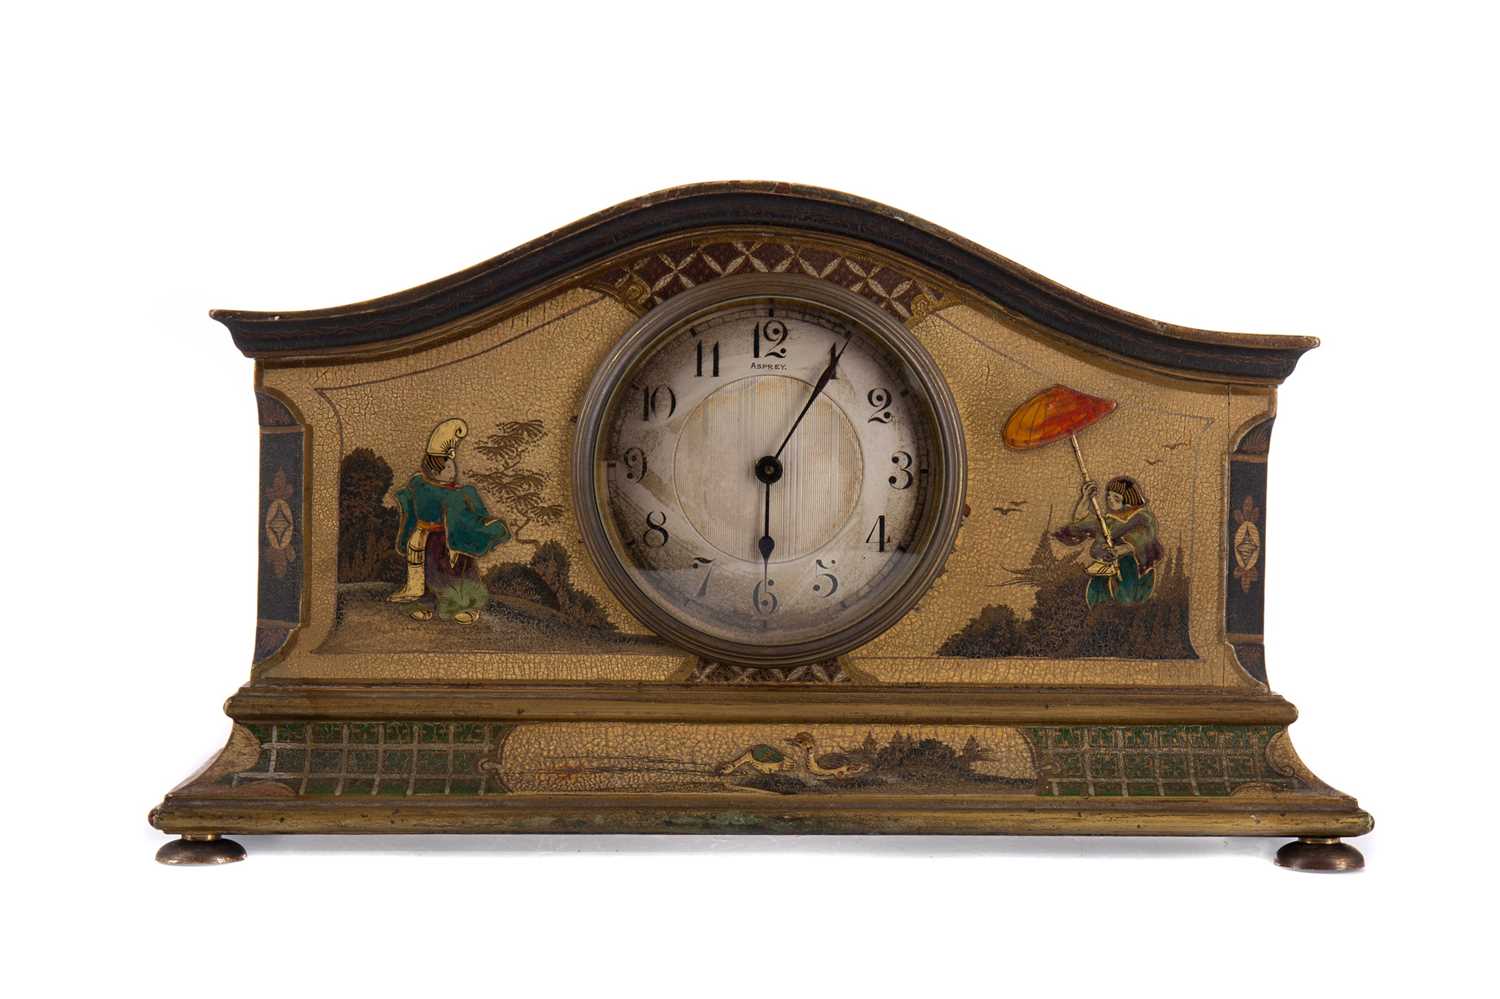 Lot 1112 - AN EARLY 20TH CENTURY CHINOISERIE MANTEL CLOCK RETAILED BY ASPREY